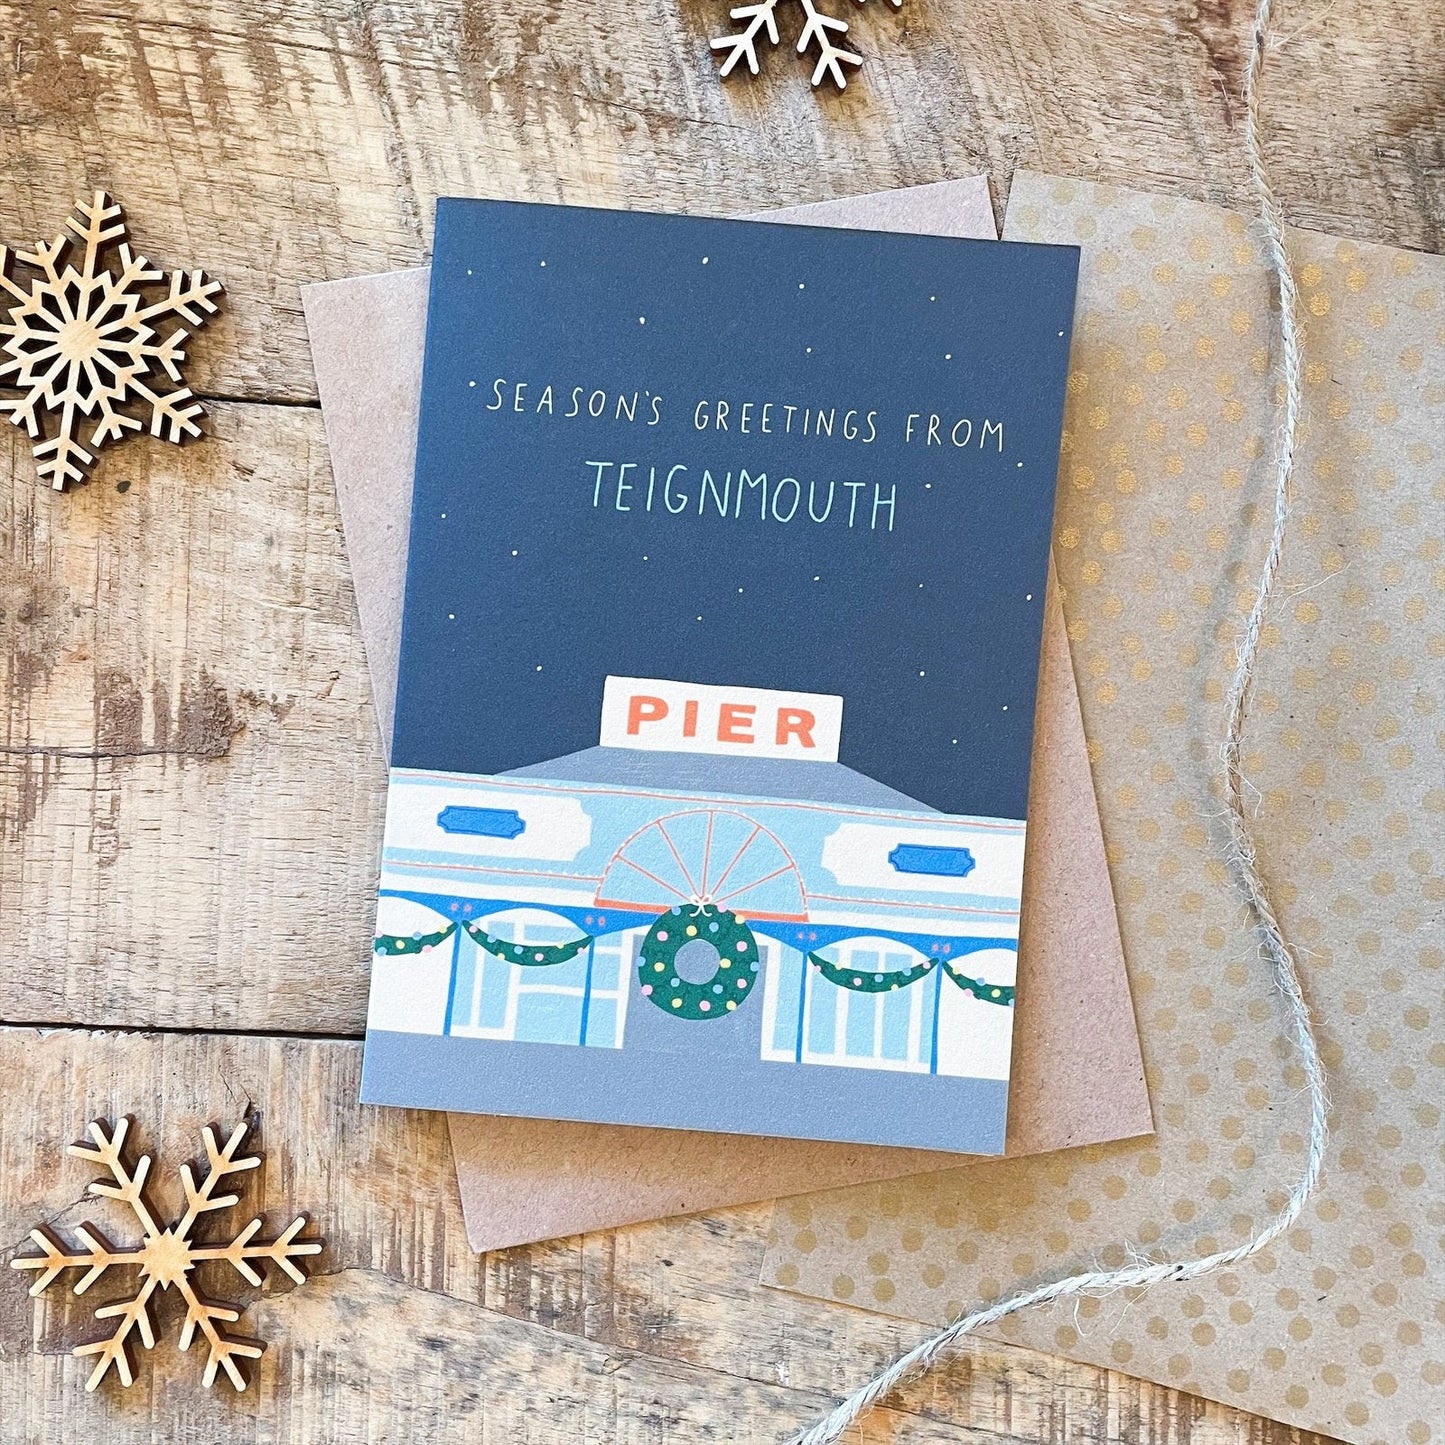 'Seasons Greetings from Teignmouth' Recycled Coffee Cup Christmas Card